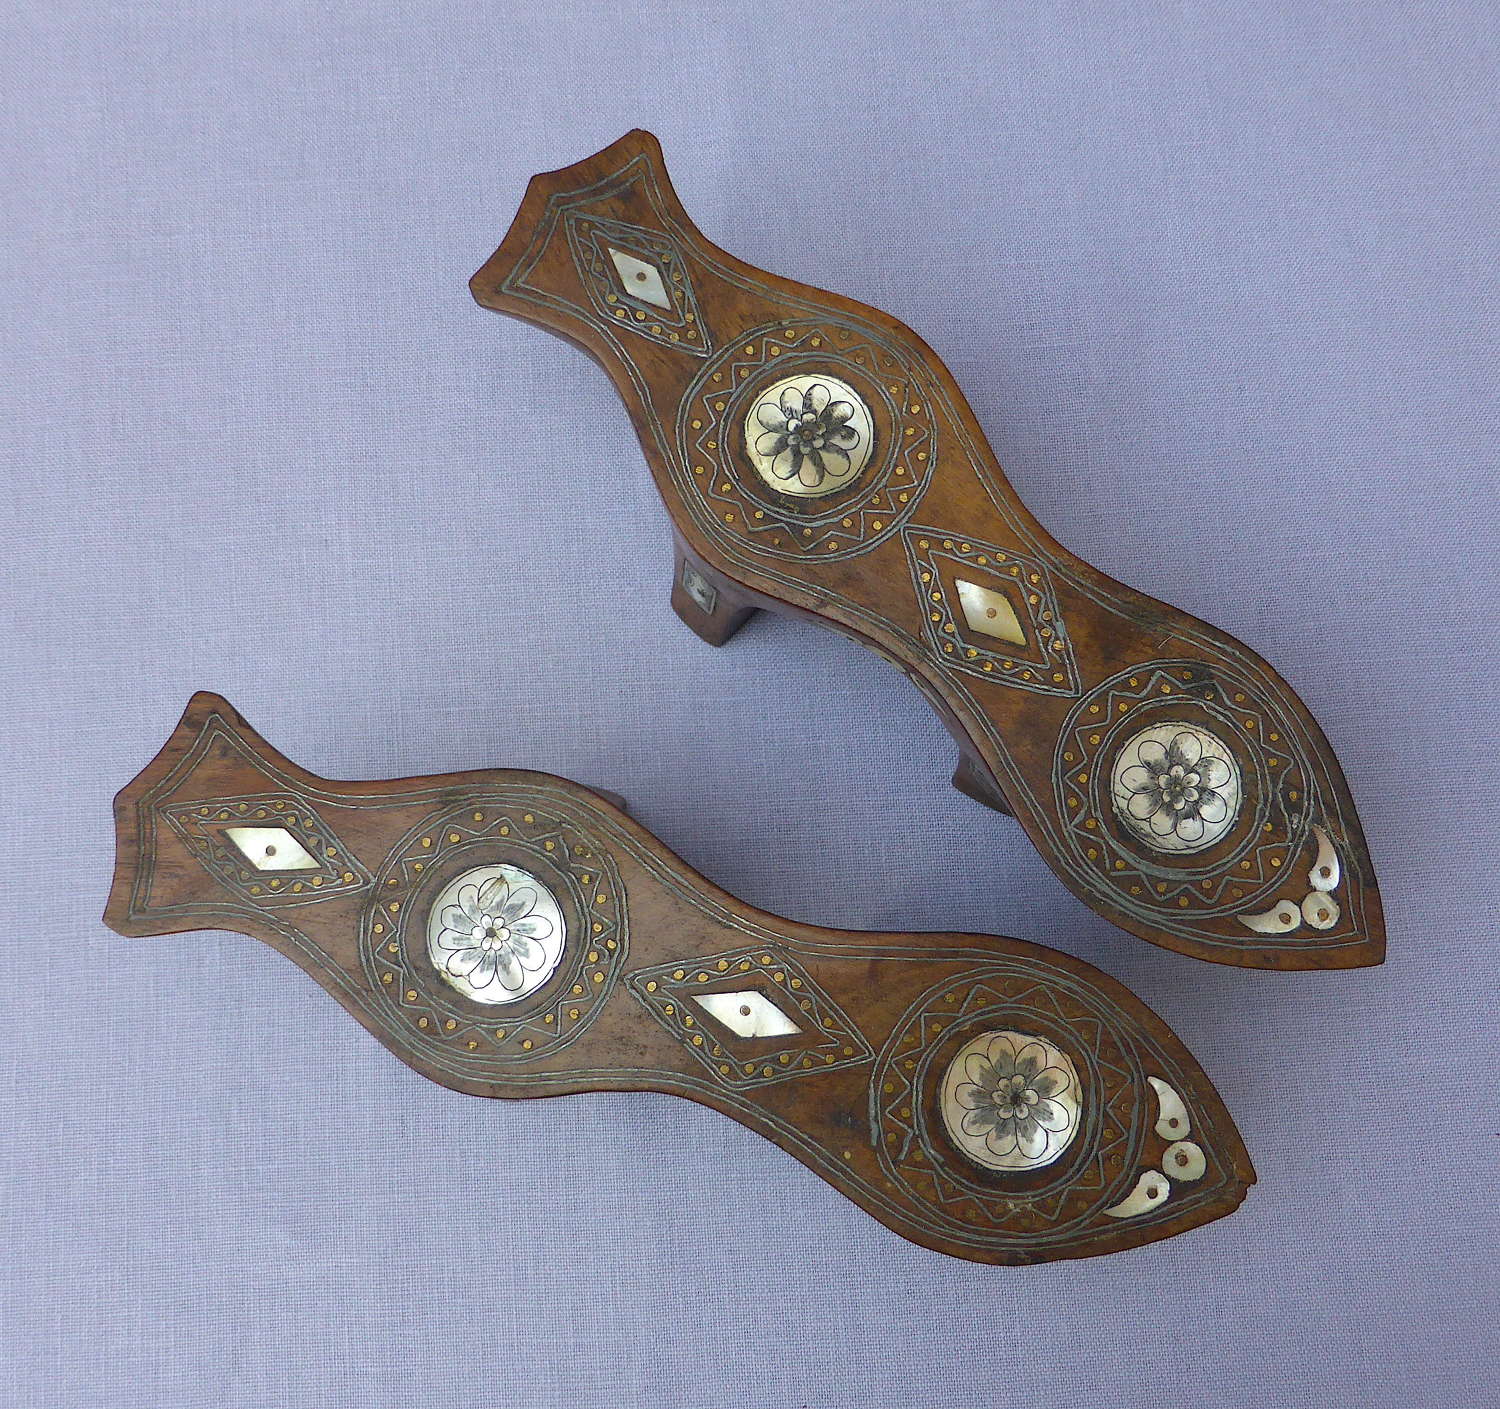 Pair of 19thC Mother of Pearl Inlaid Stilt Shoes